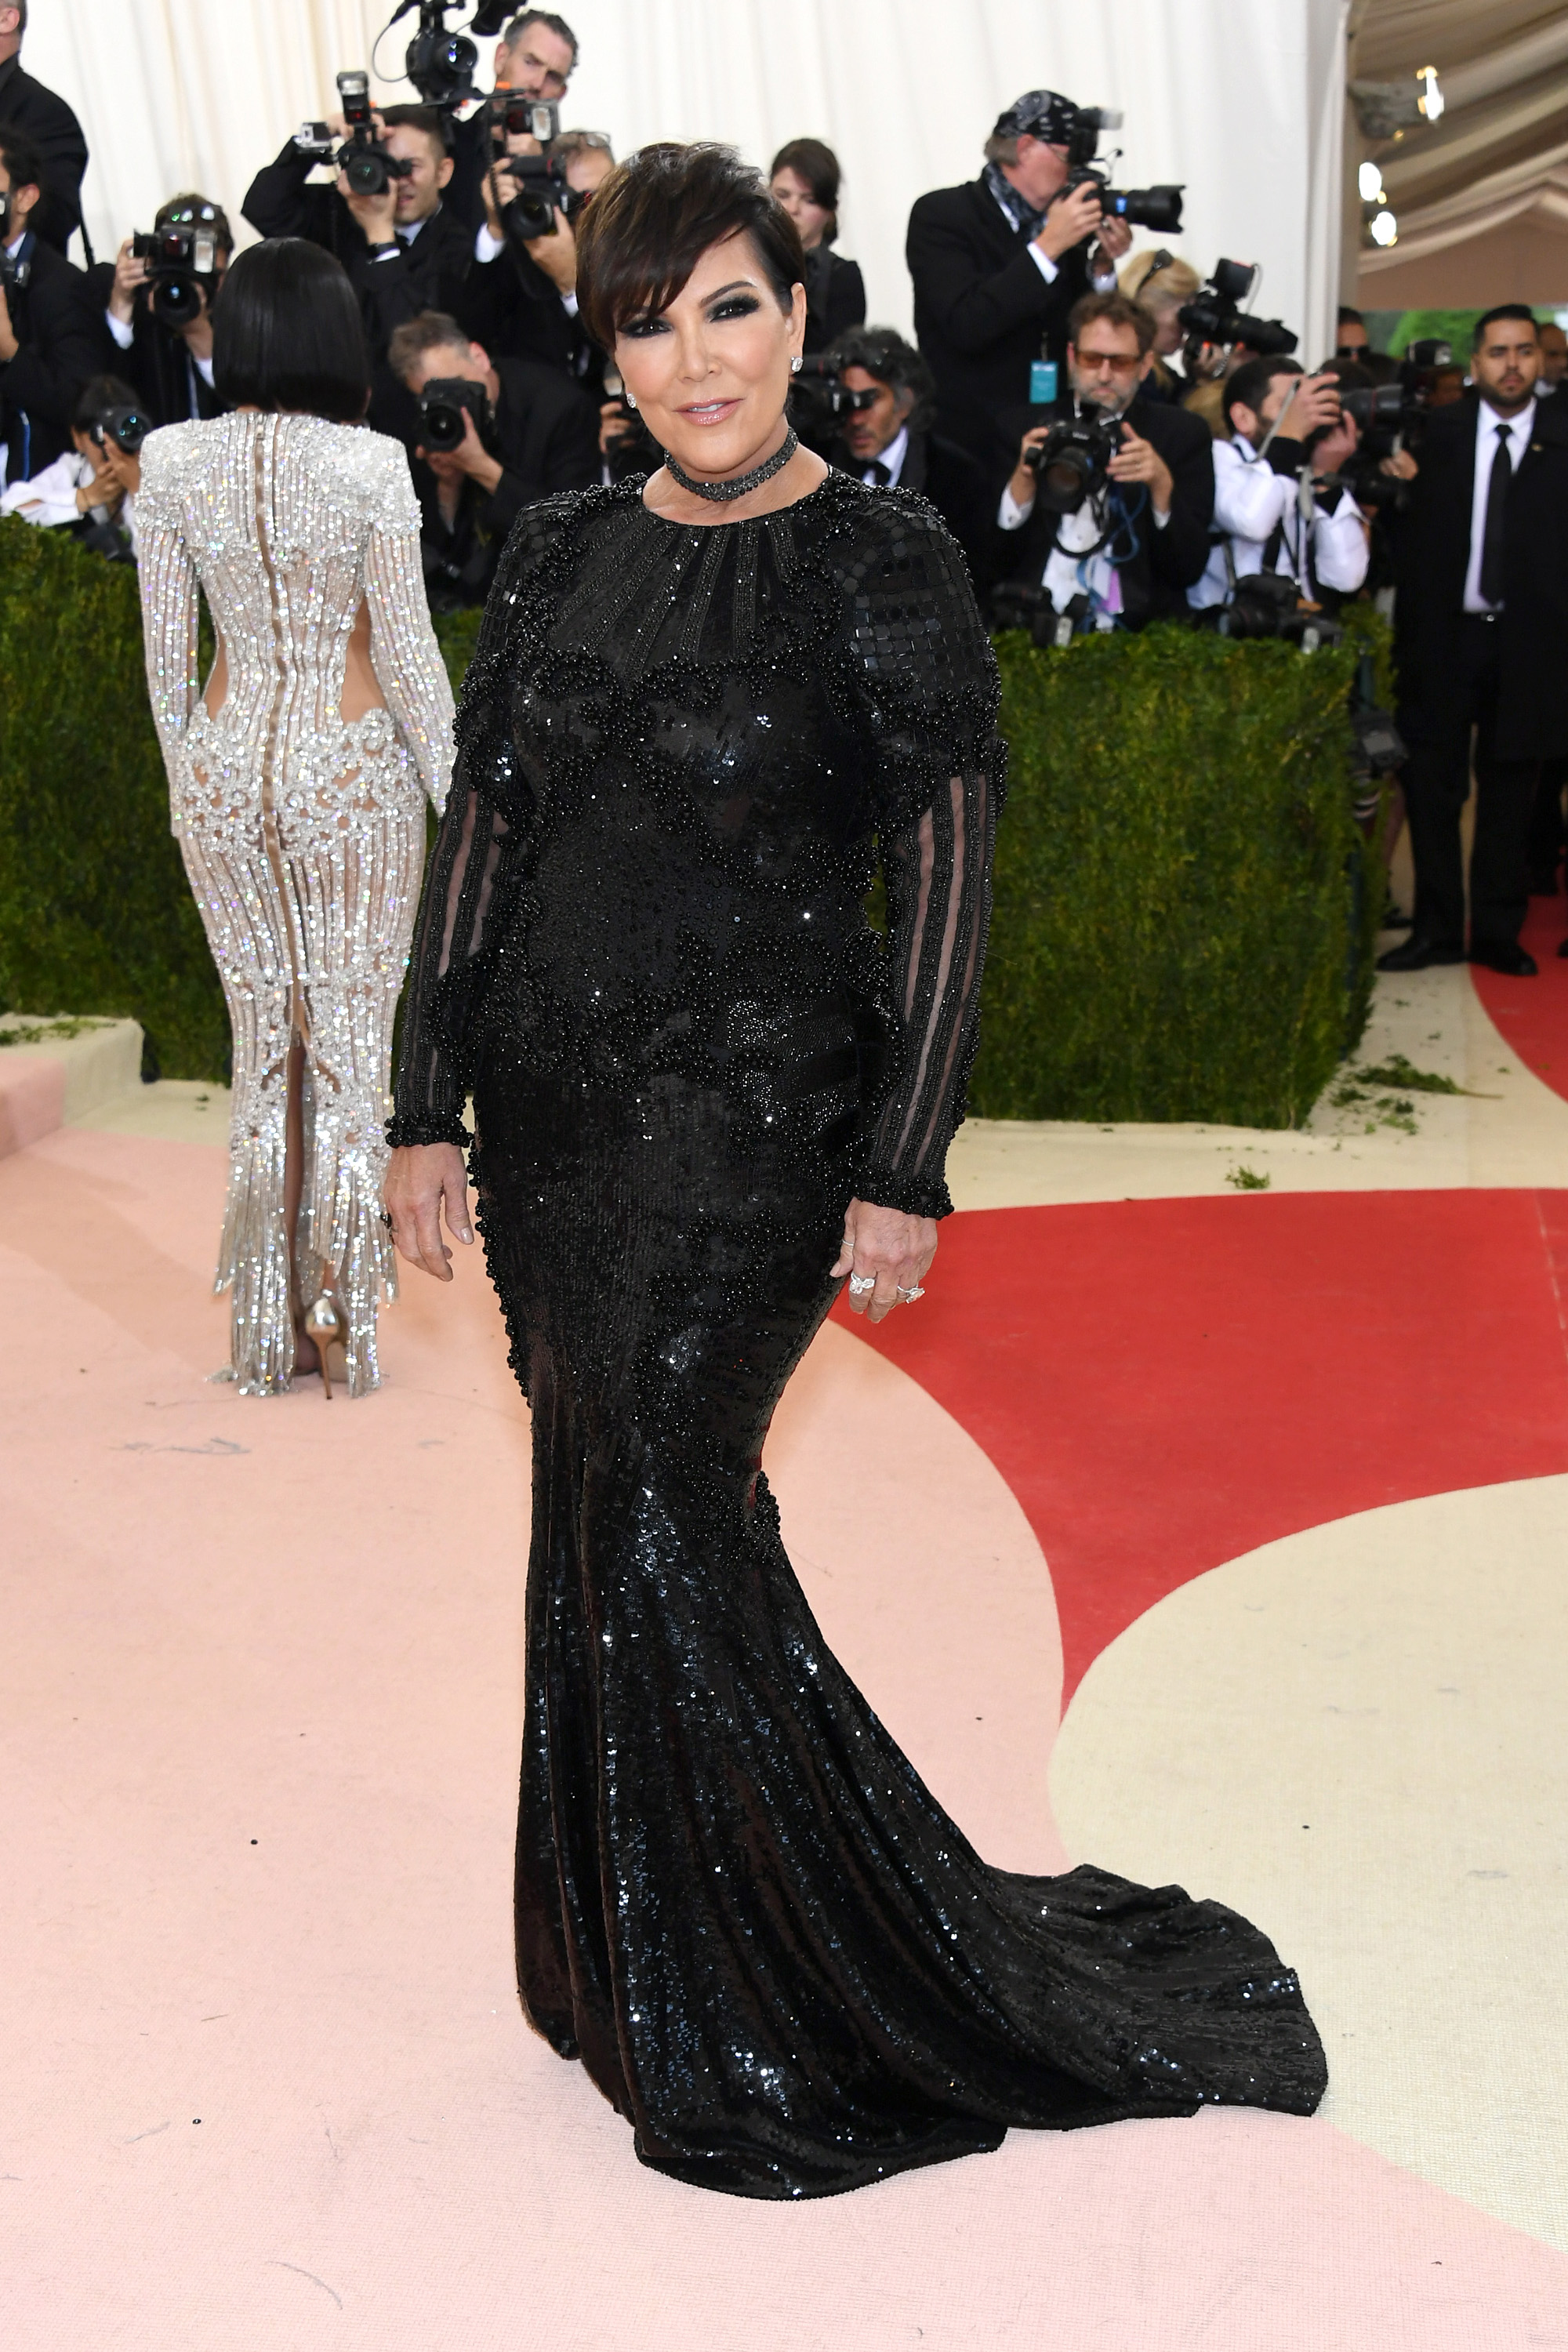 Kris Jenner attends "Manus x Machina: Fashion In An Age Of Technology" Costume Institute Gala at Metropolitan Museum of Art on May 2, 2016 in New York City.